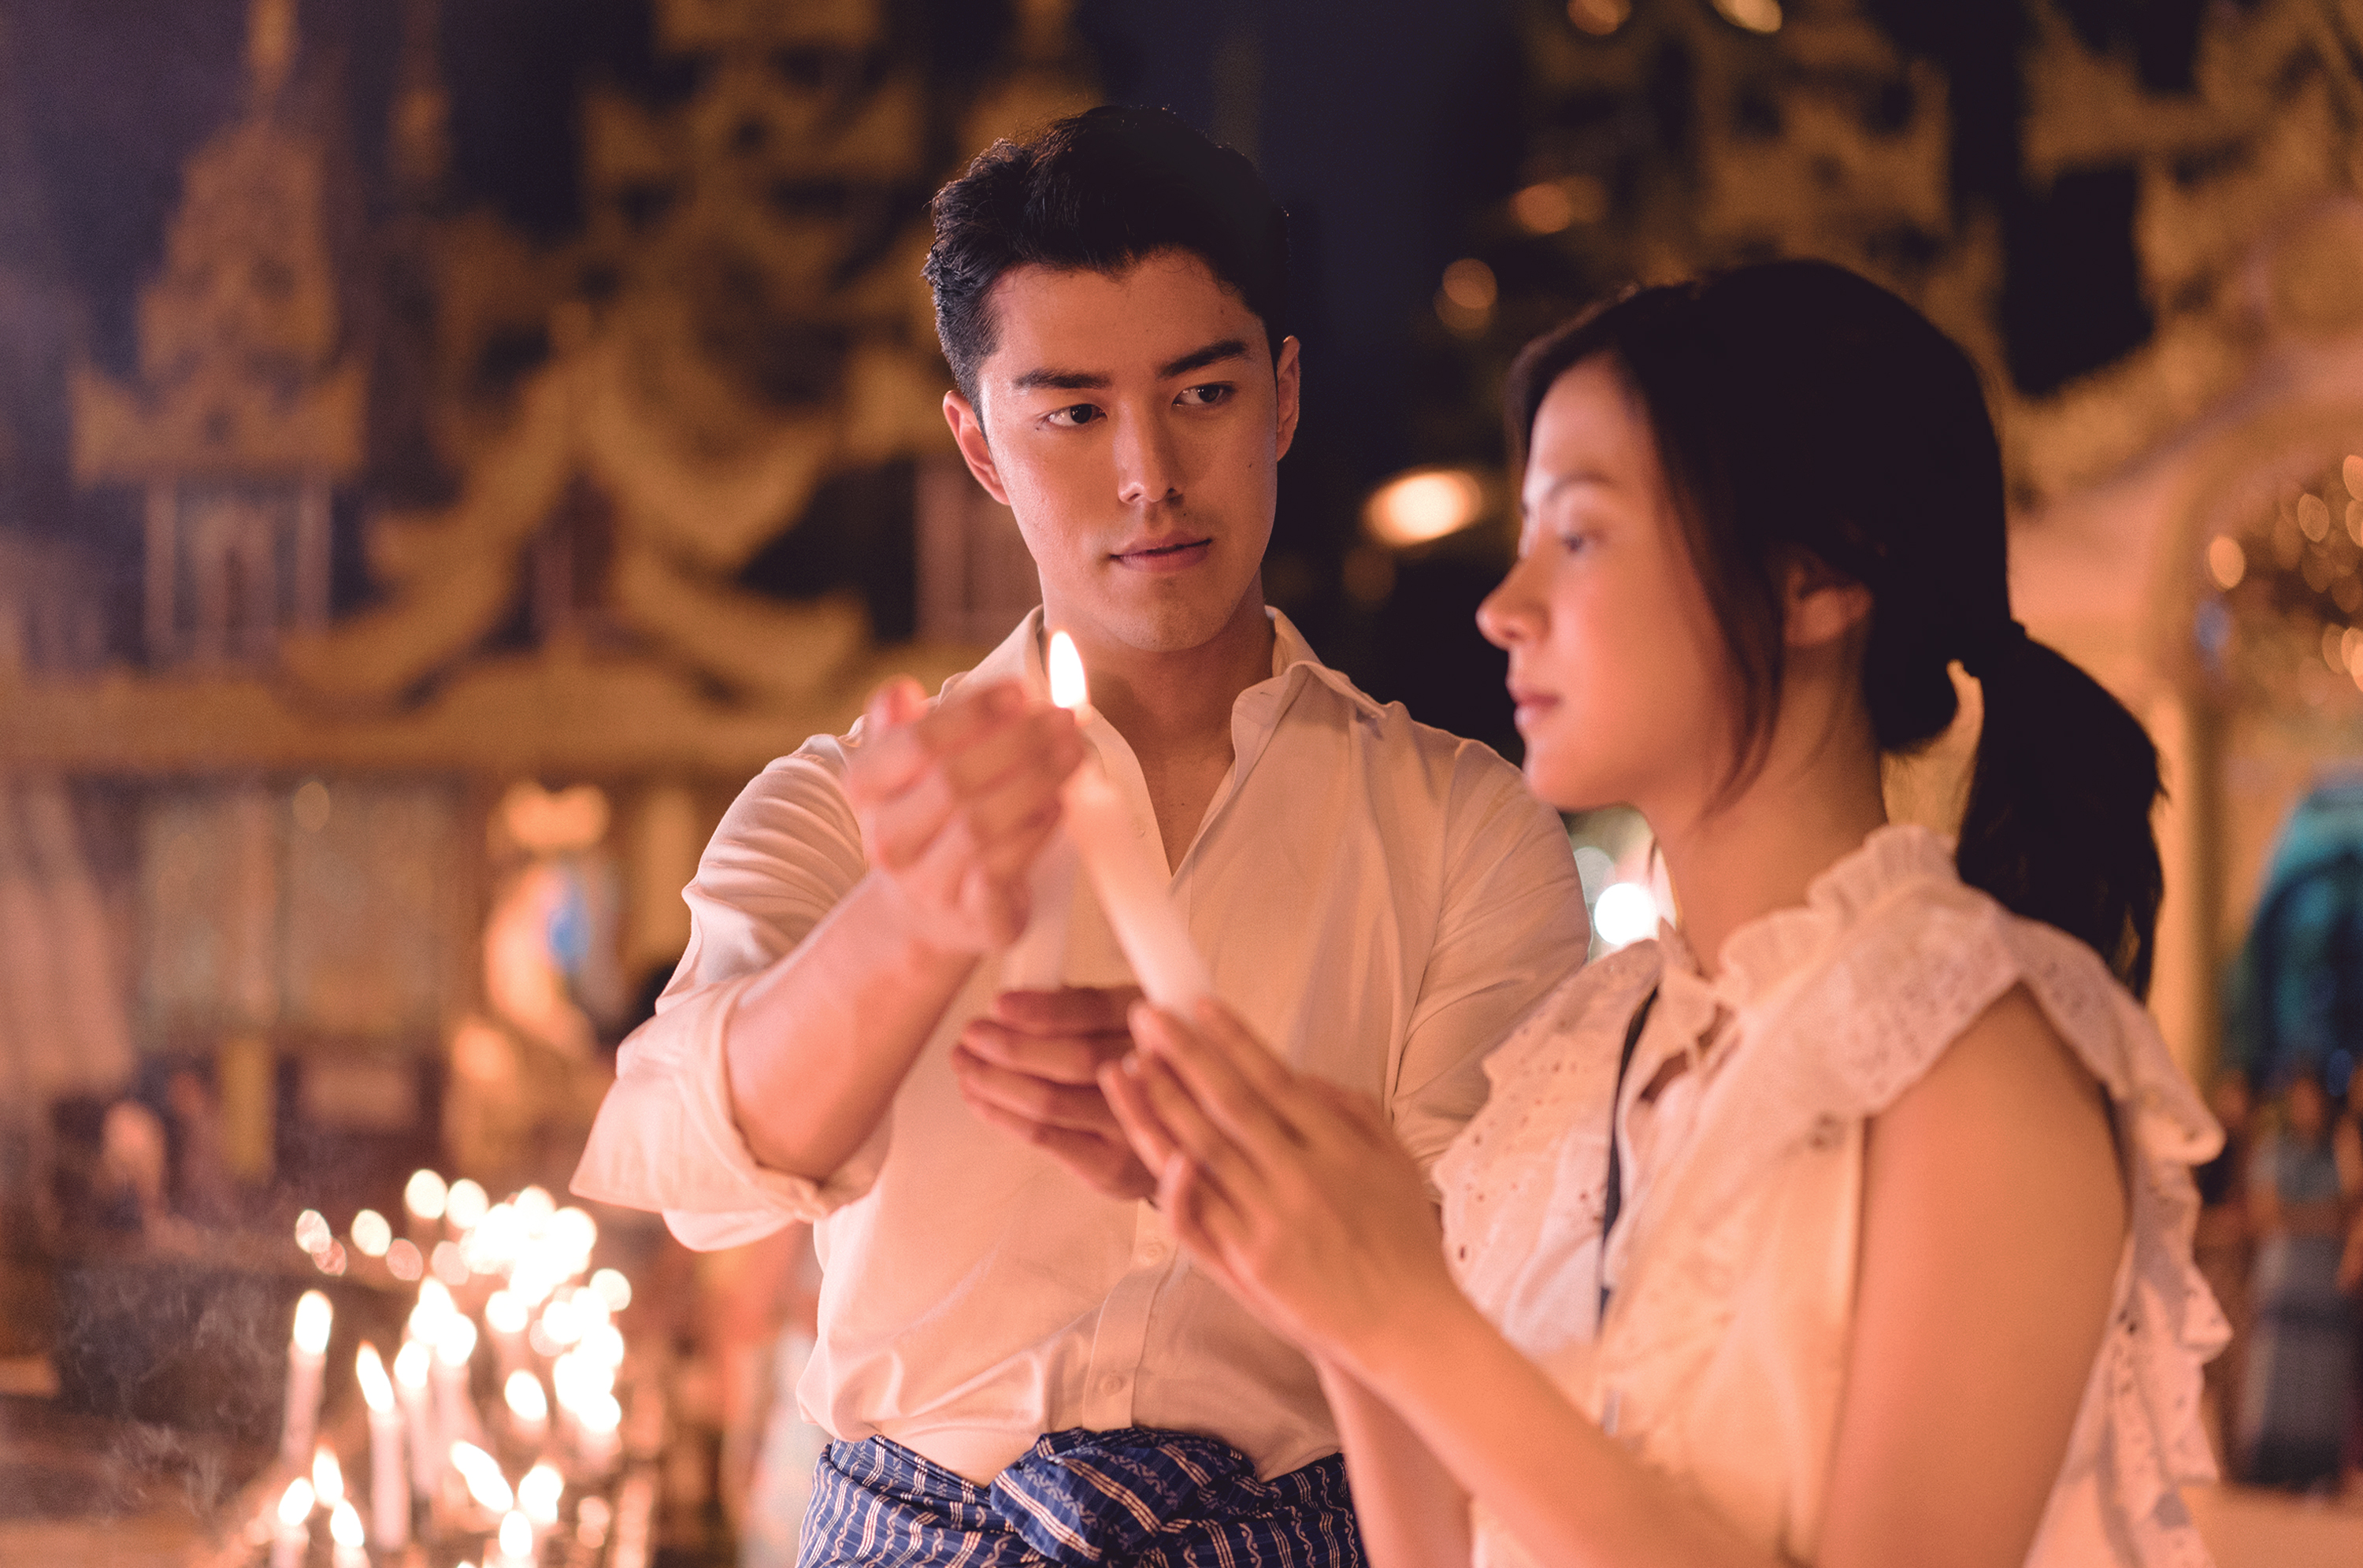 Highest Grossing Thai Film of 2019, Friend Zone, to Hit Philippines Cinemas this April 10